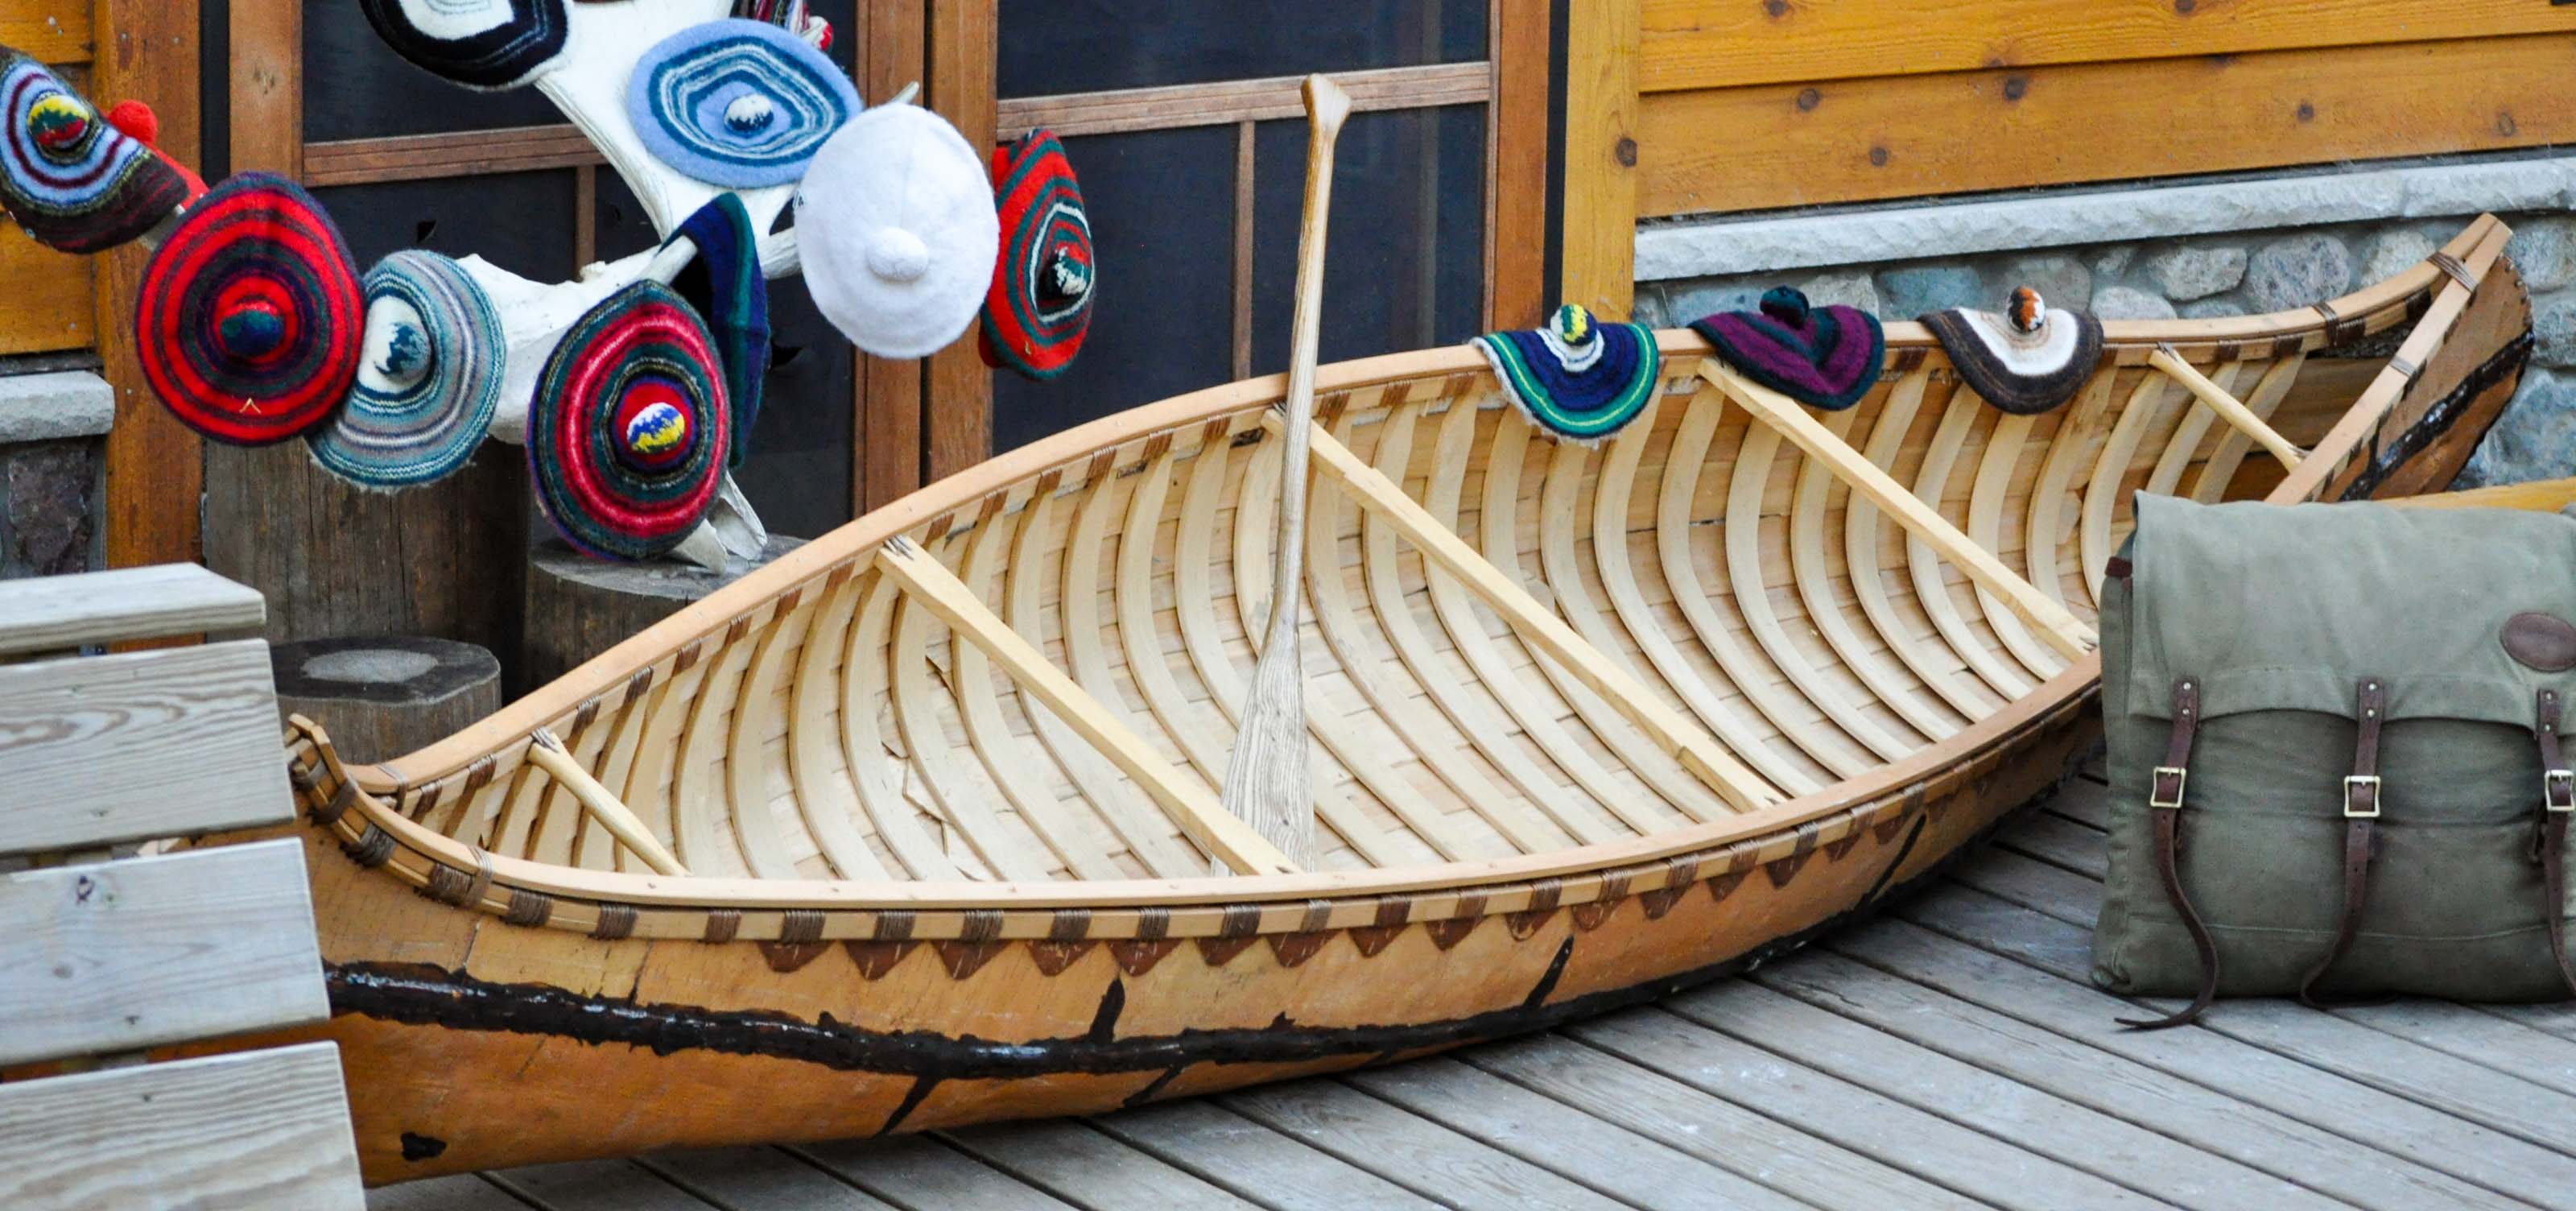 wooden canoe on a deck.